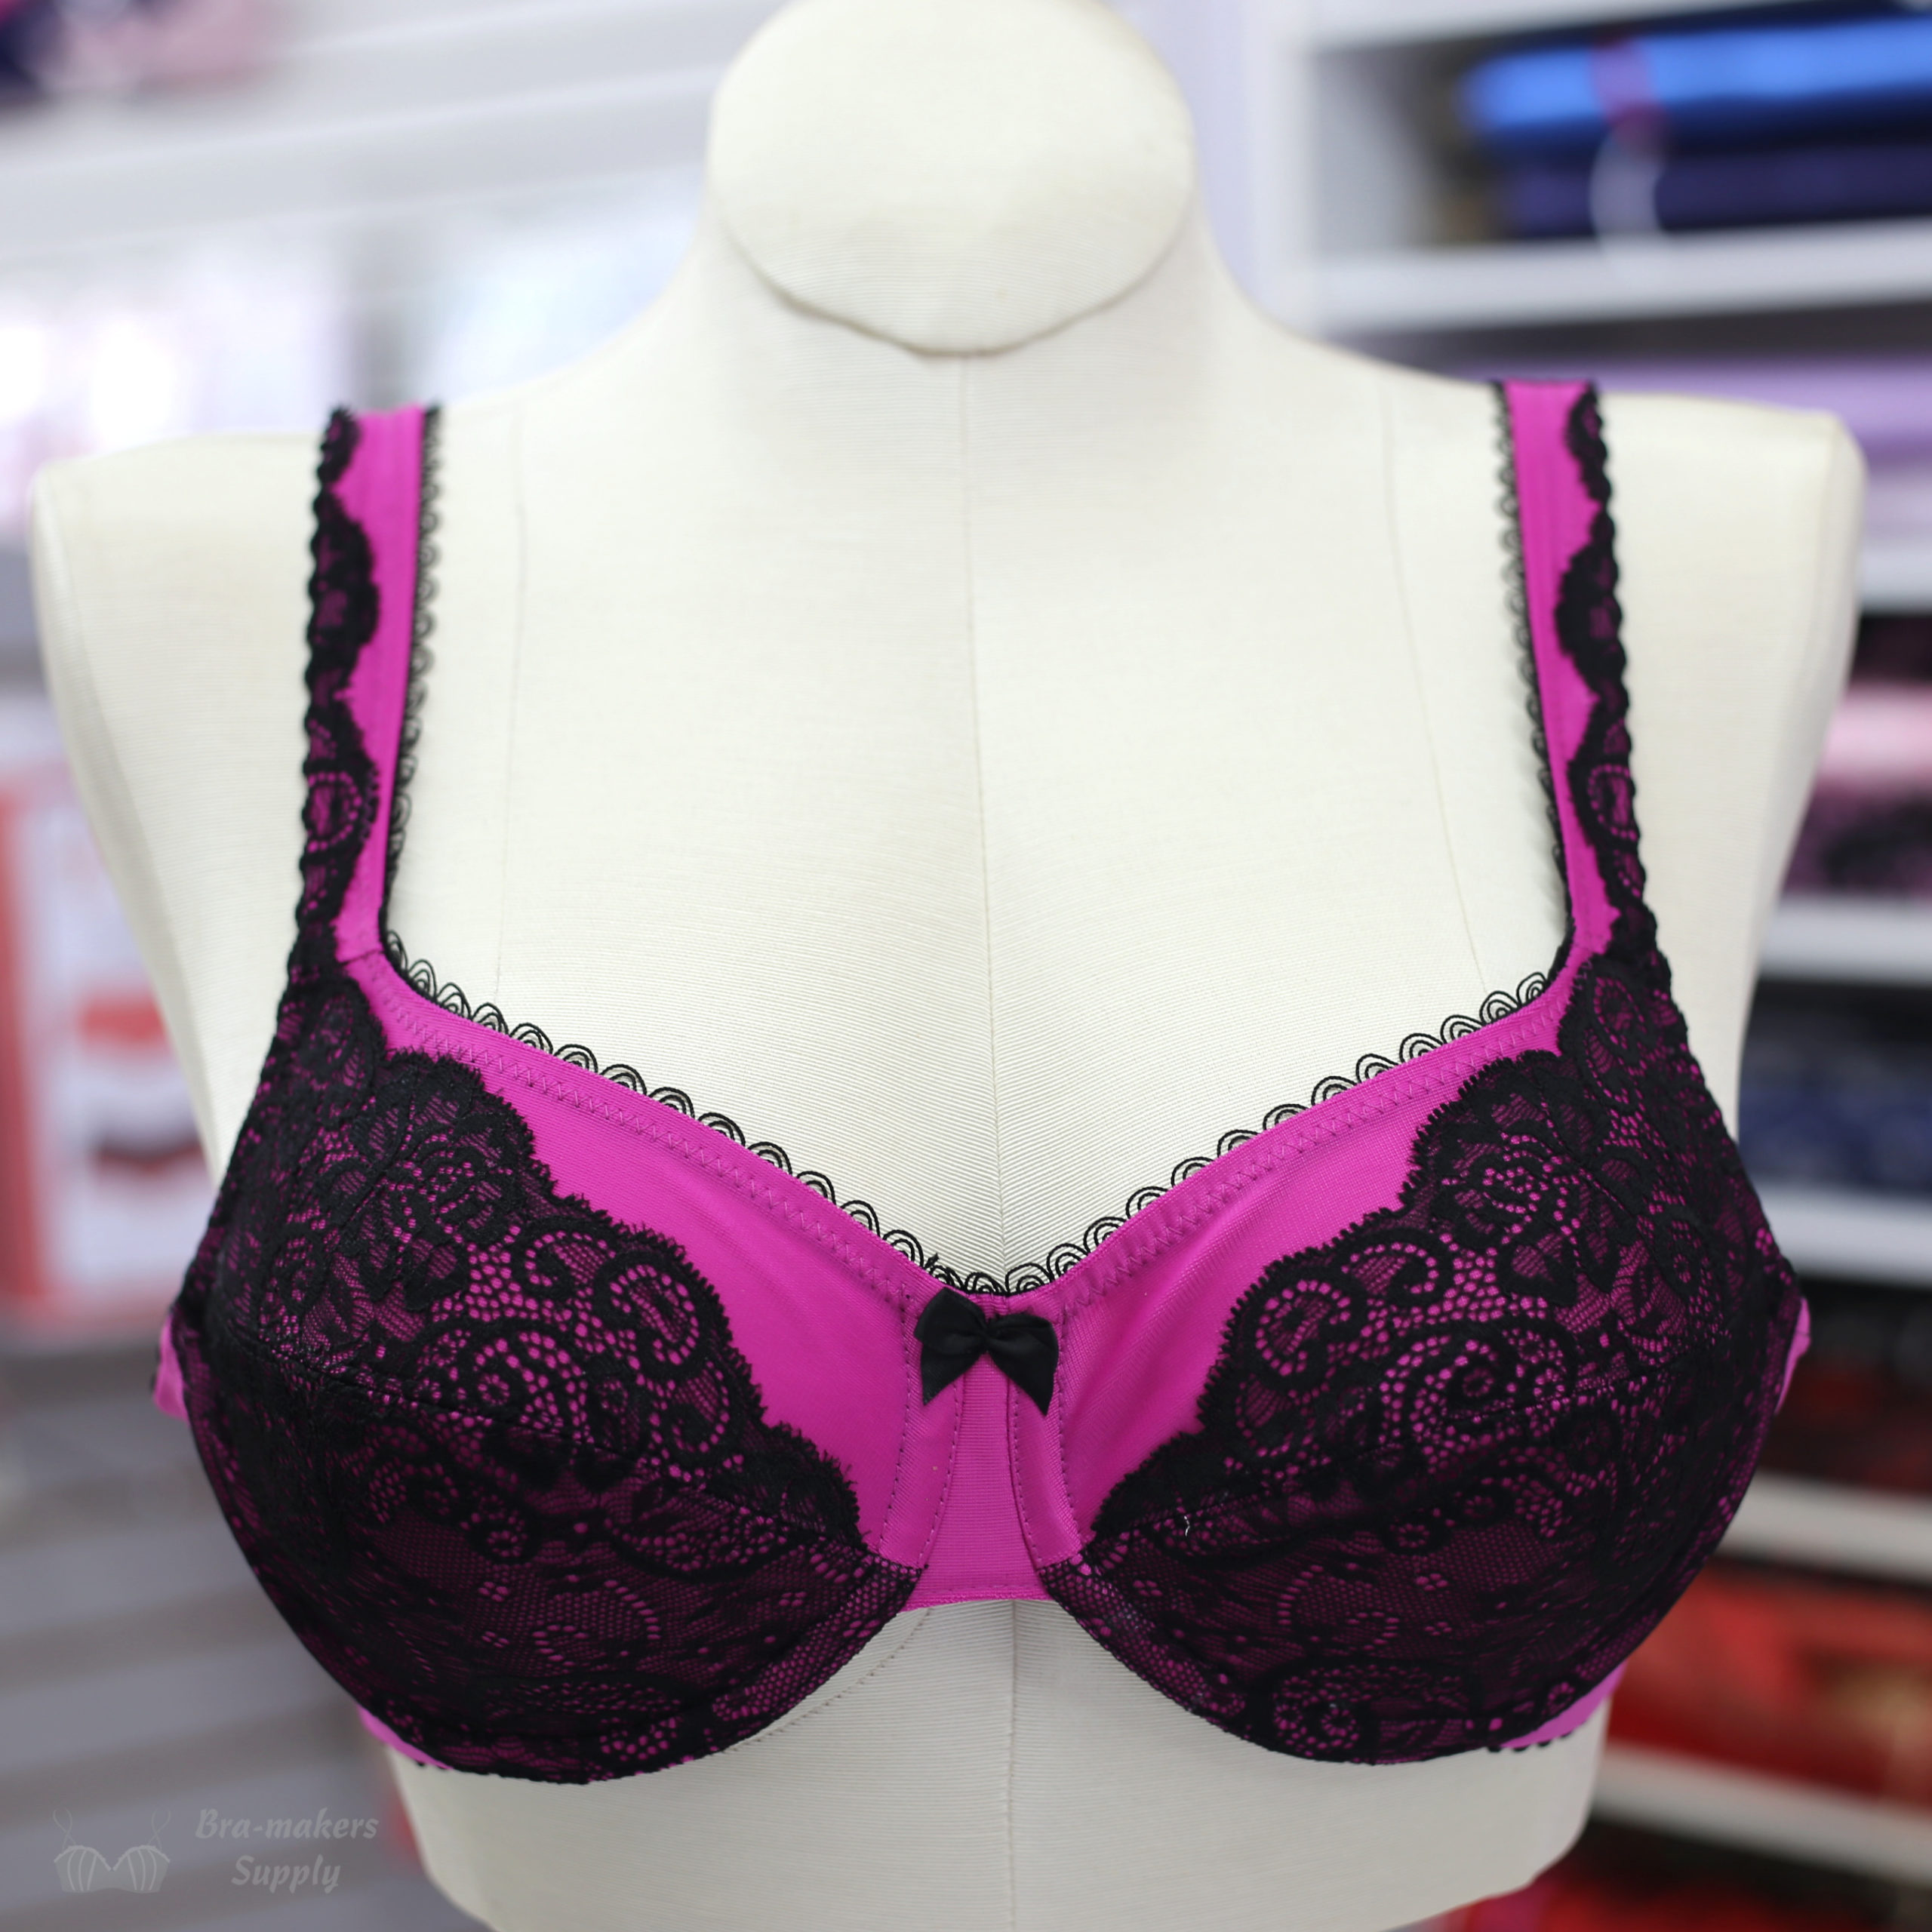 LINDA Underwired Bra Pattern With Partial Band Pin up Girls